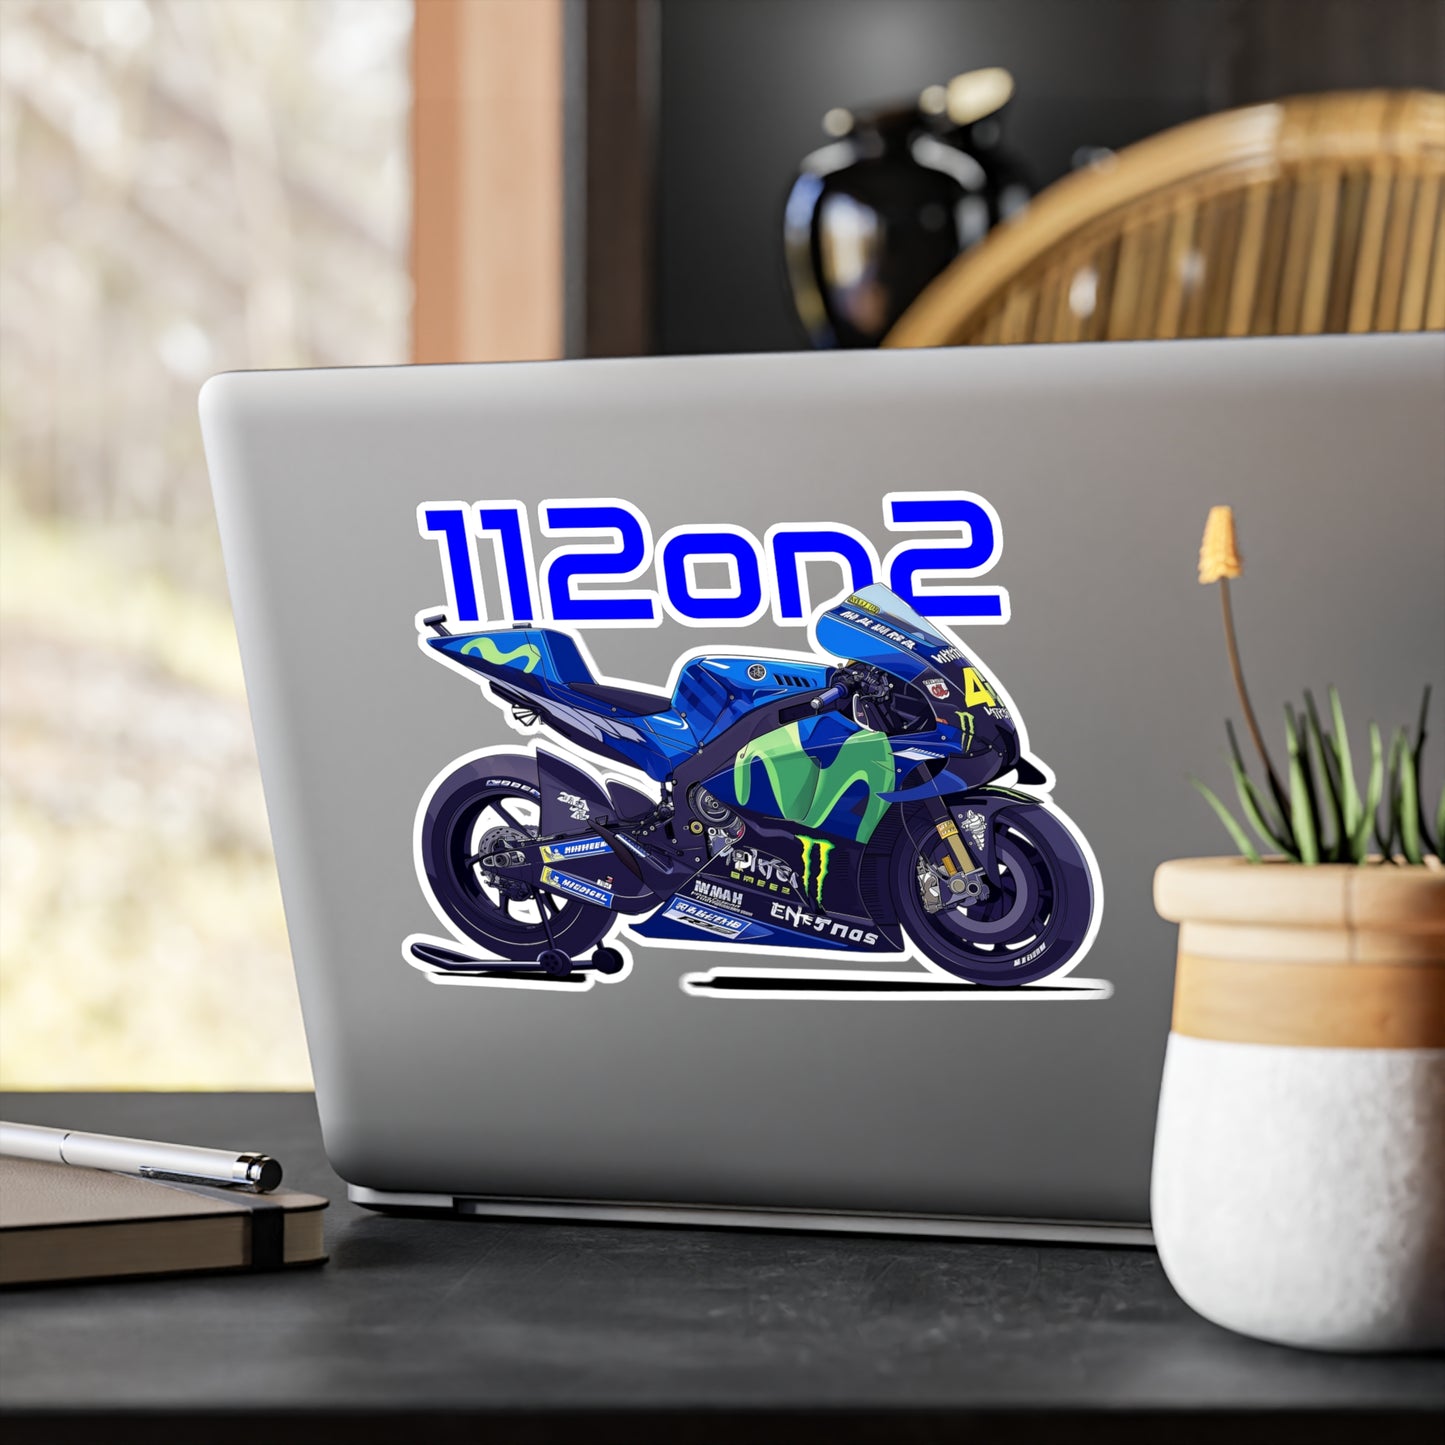 112on2 Cartoon Racing Motorcycle V3 Stickers